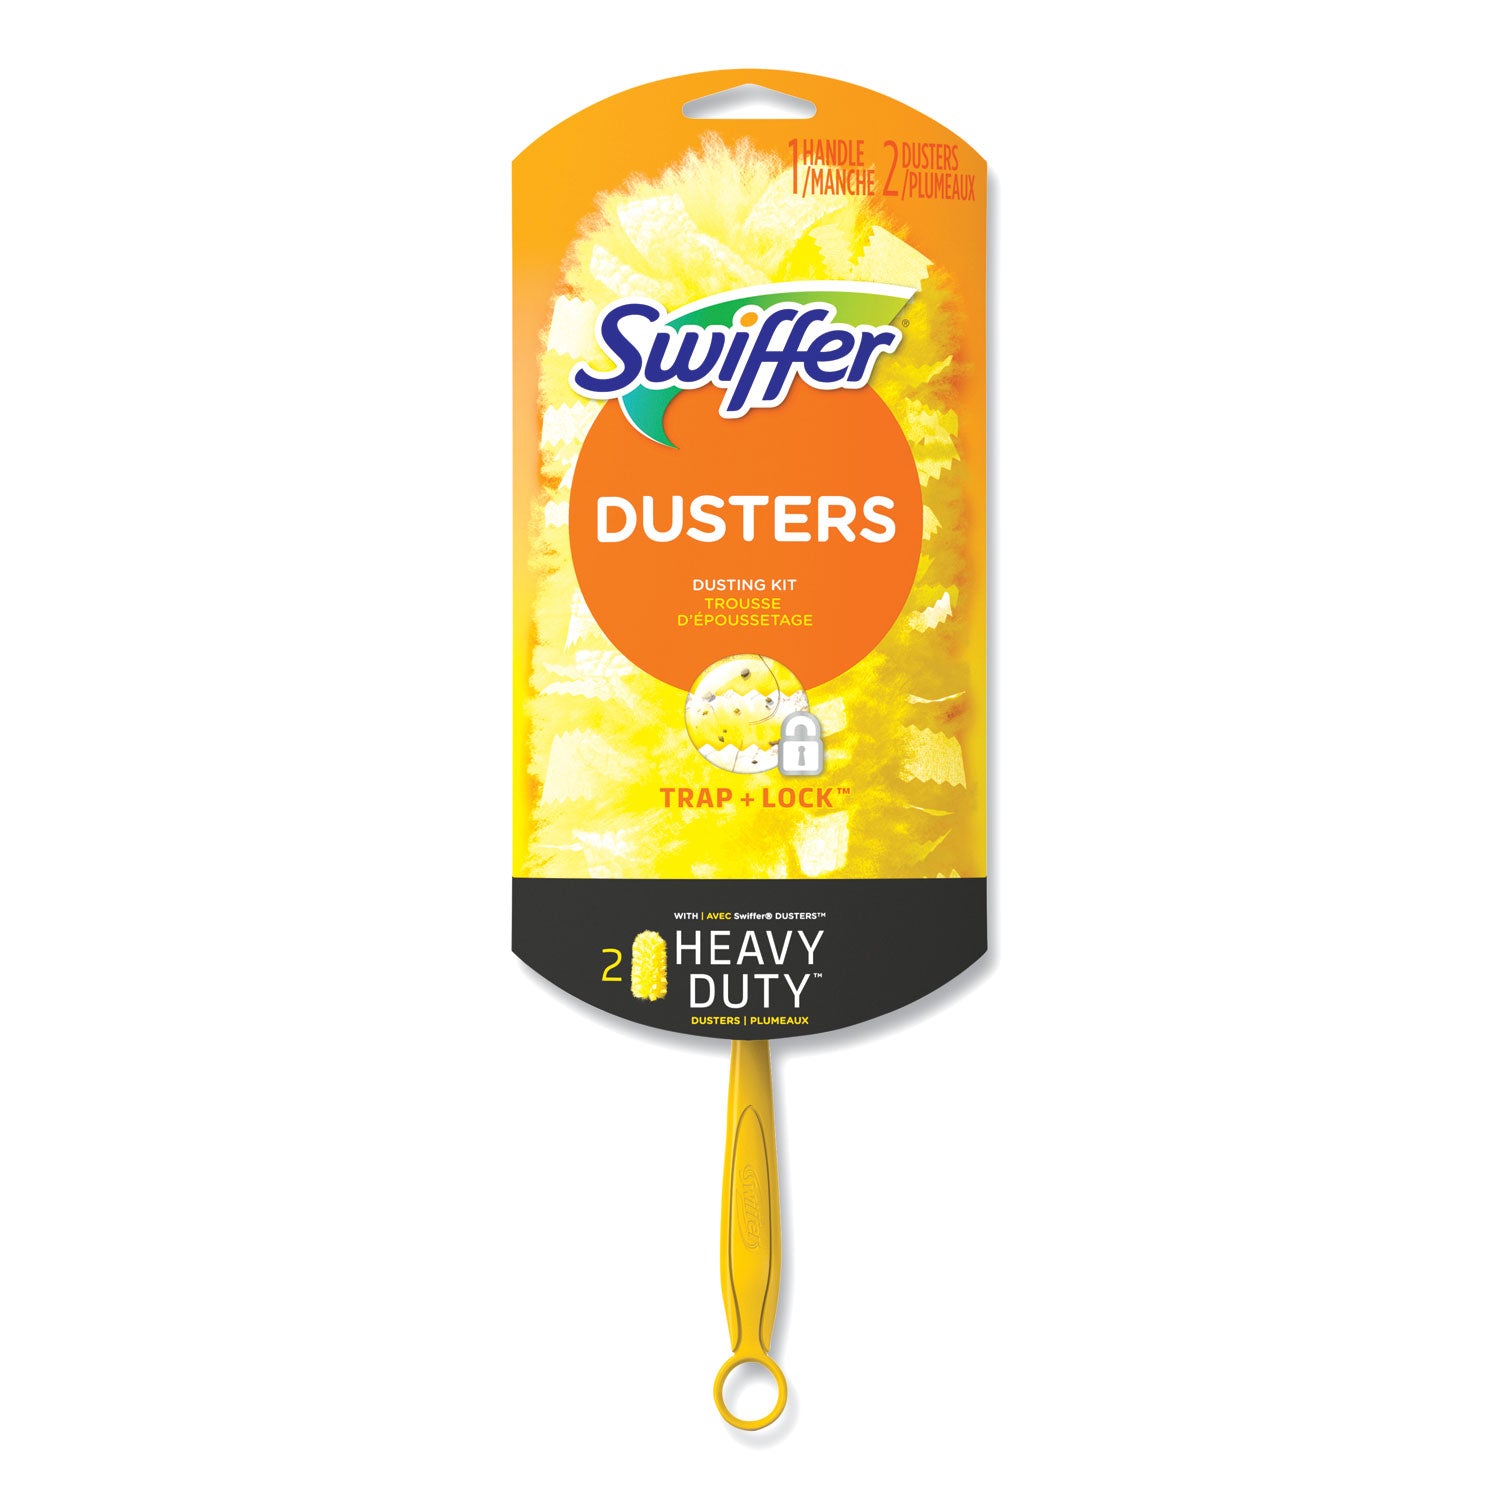 heavy-duty-dusters-starter-kit-6-handle-with-two-disposable-dusters_pgc08109kt - 1